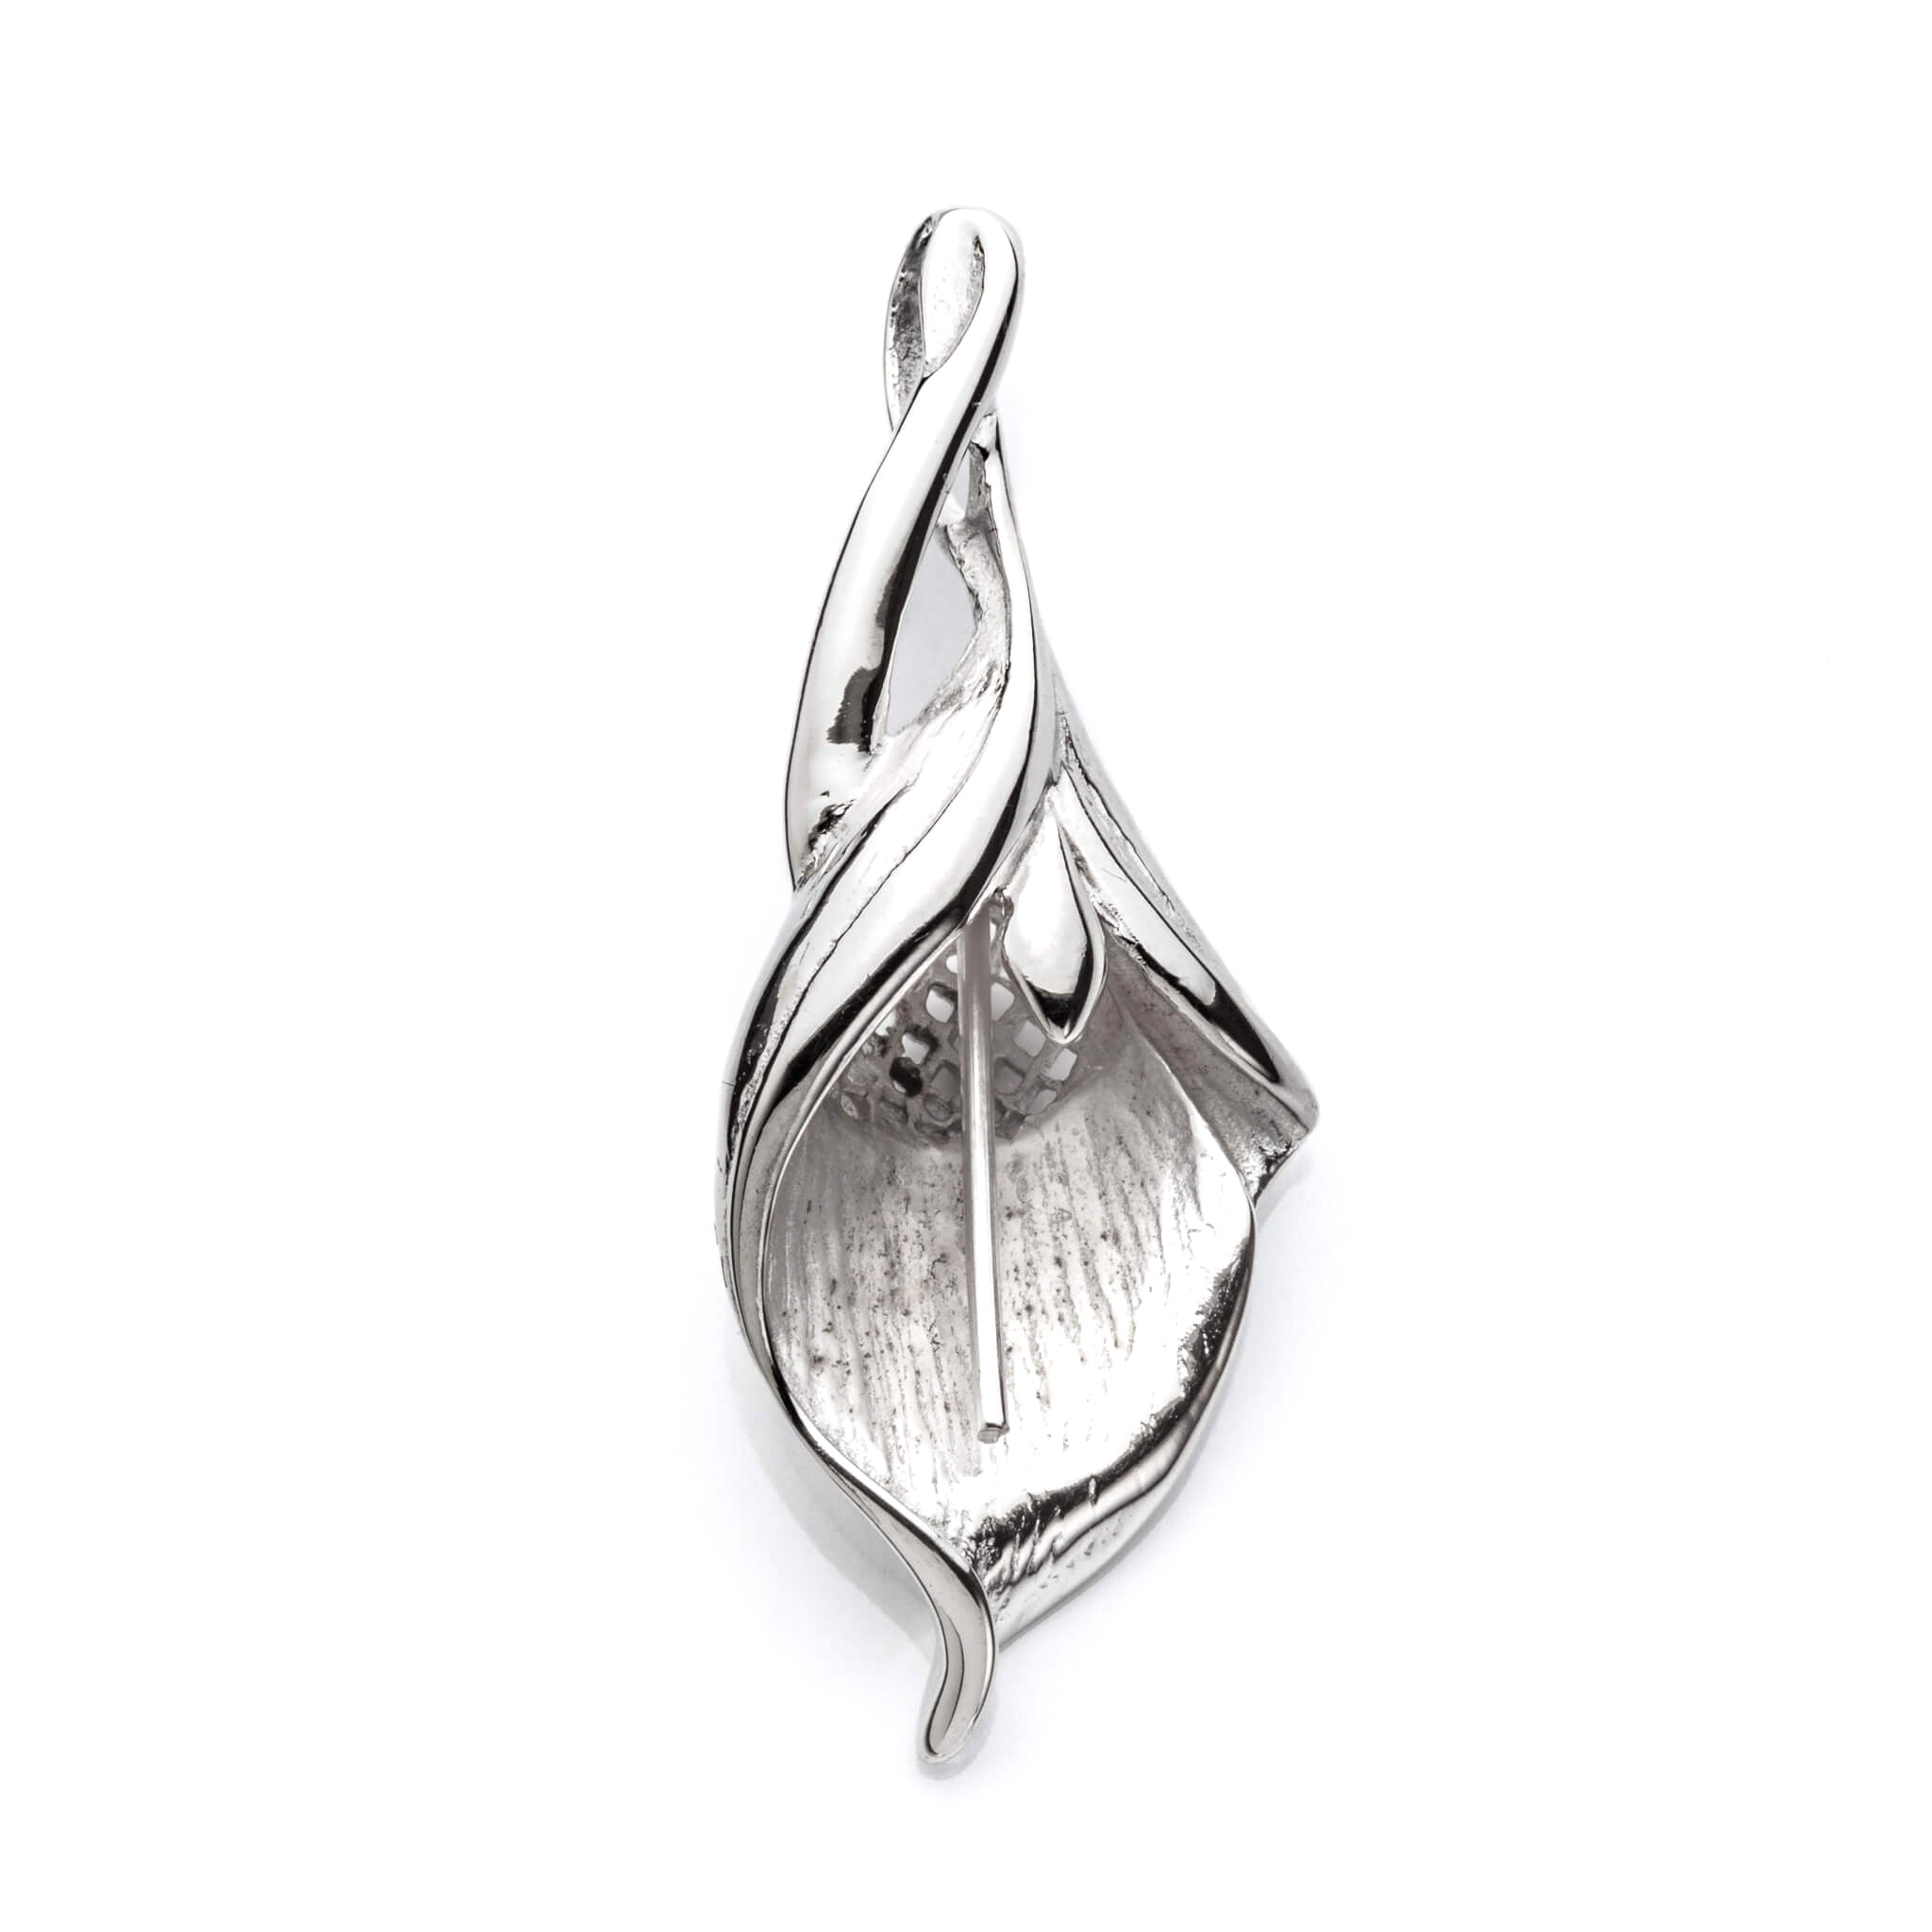 Cala Lily Flower Pendant with Fluted Peg Mounting in Sterling Silver 5mm